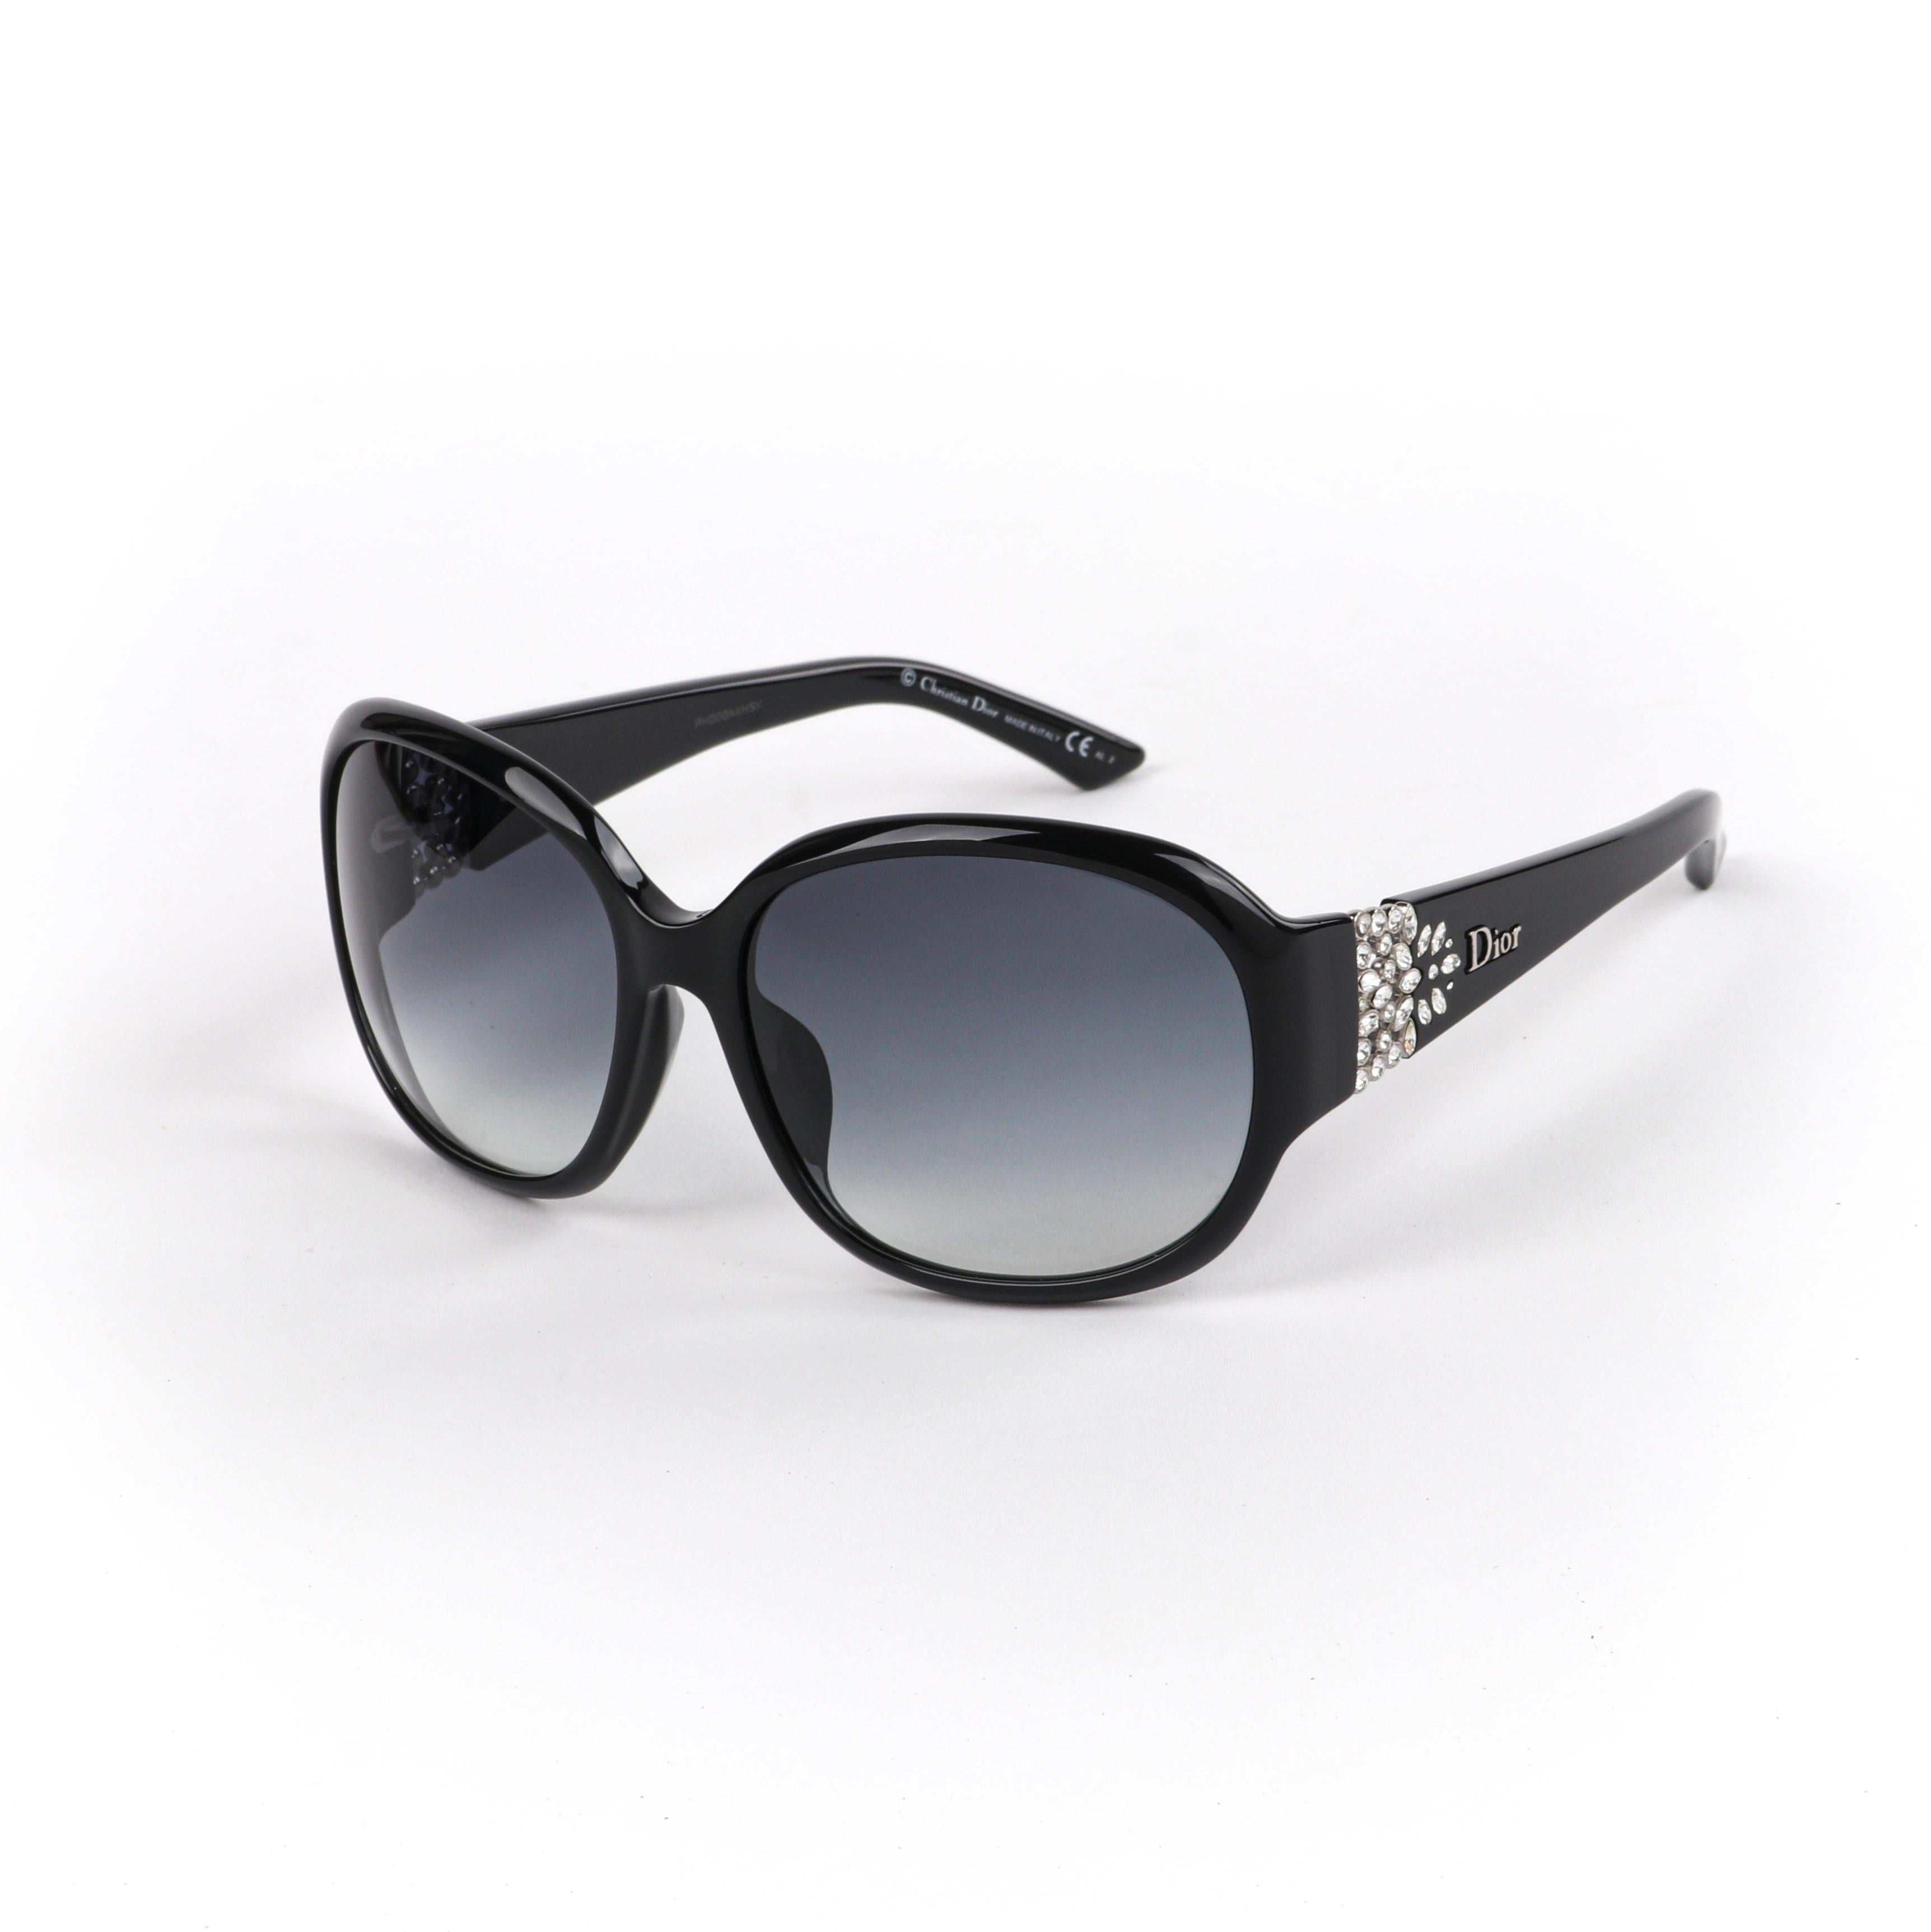 CHRISTIAN DIOR “Delicacy F” Ltd Ed. Black Swarovski Crystal Oversized Sunglasses w/Box
 
Brand/Manufacturer: Christian Dior
Circa: 2014
Style: Oversized sunglasses
Color(s): Black; Crystals: White/Clear
Lined: No
Unmarked Materials (feel of):